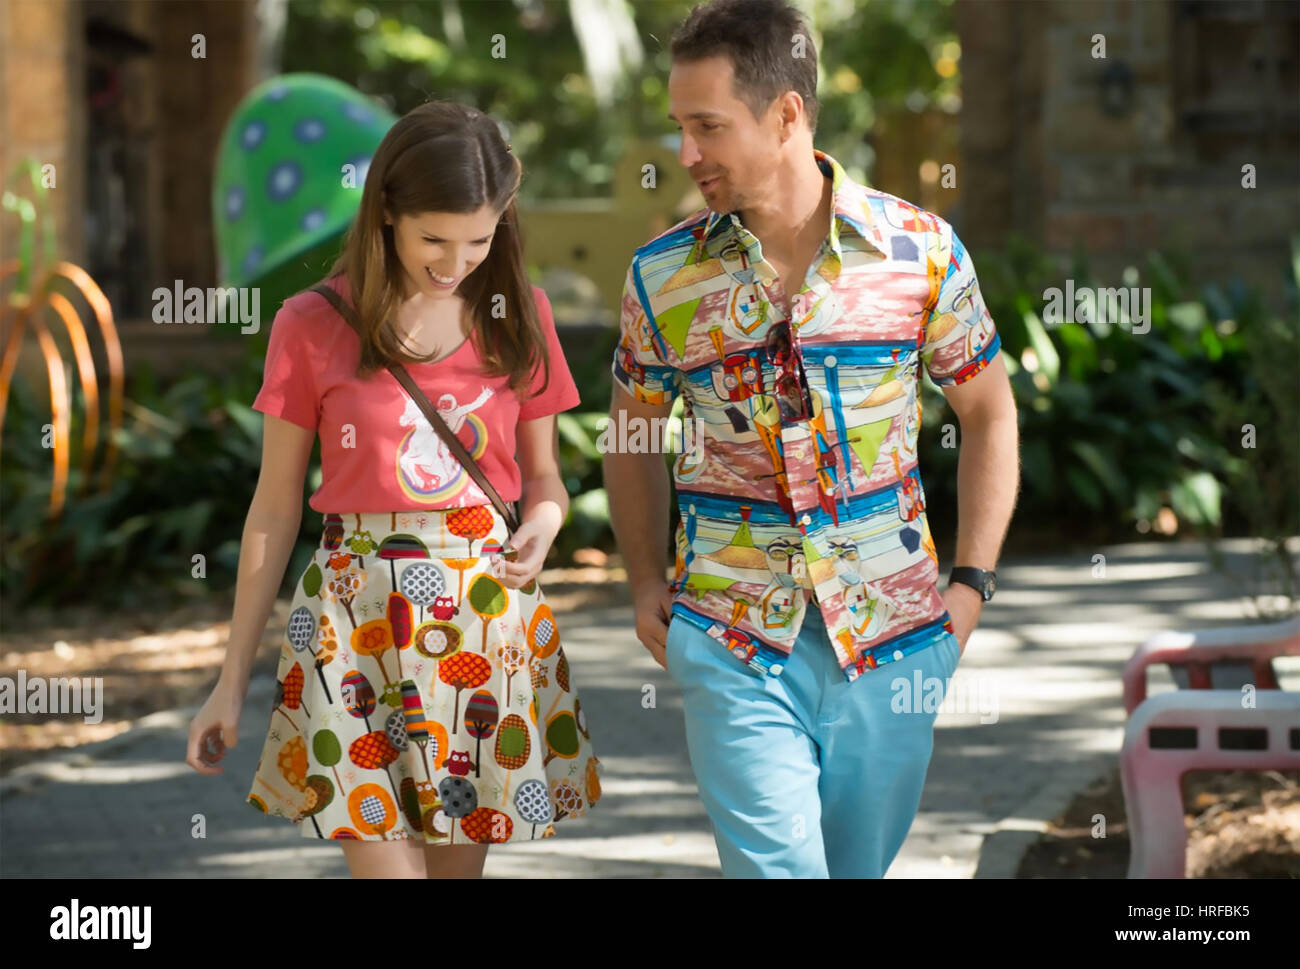 MR. RIGHT  2015 Amasia Entertainment film with Anna Kendrick and Sam Rockwell Stock Photo